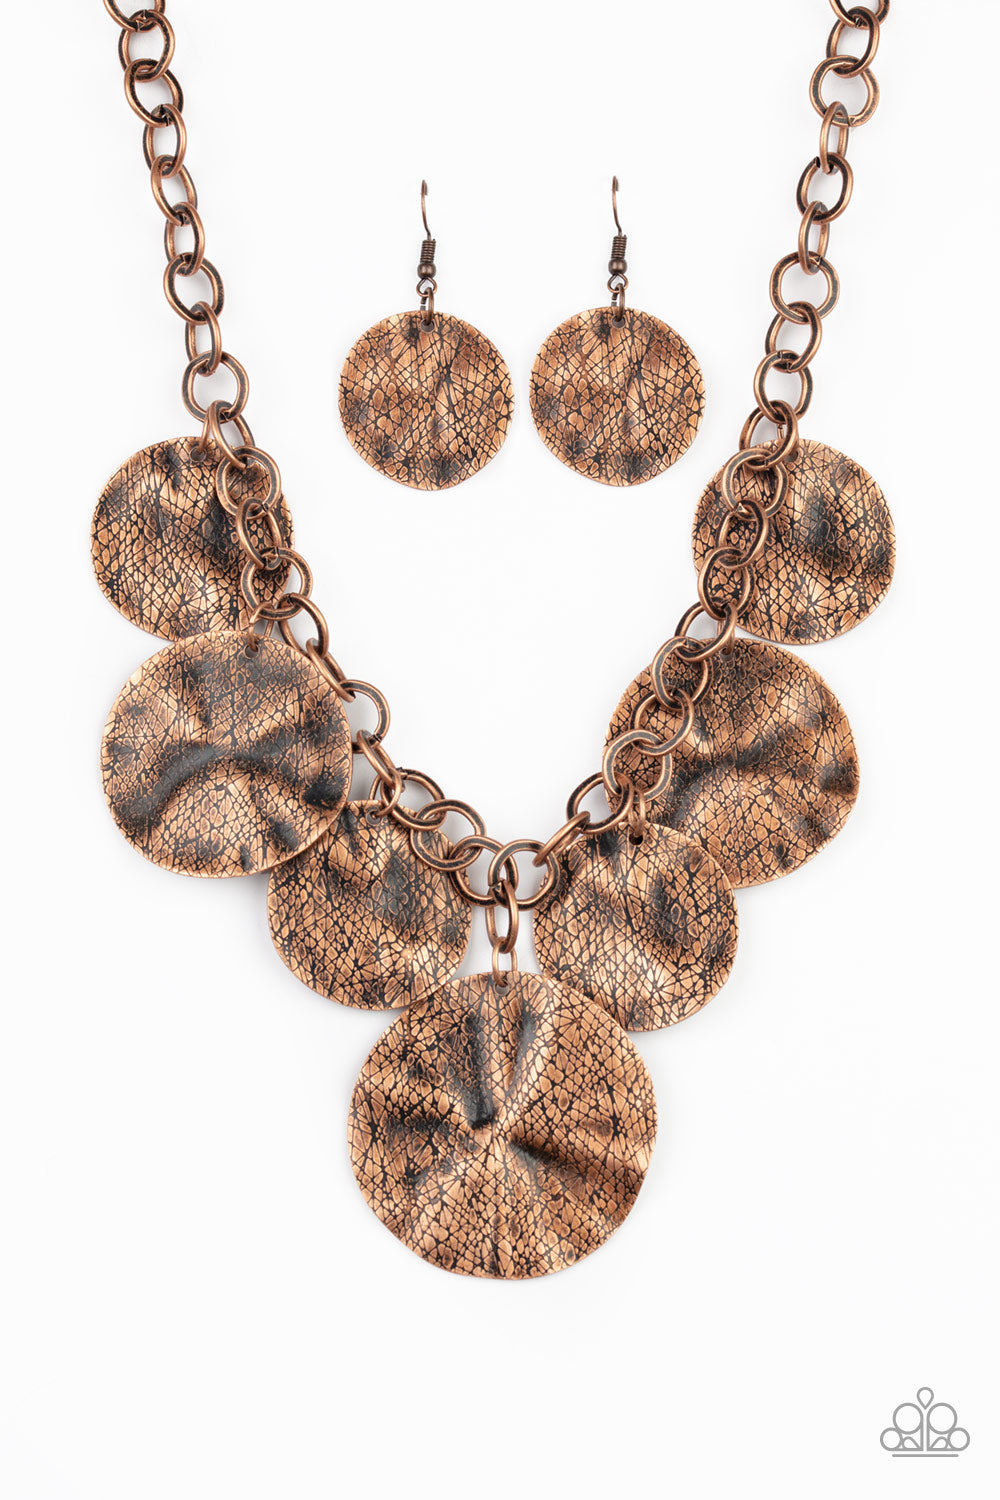 Barely Scratched The Surface - Copper Necklace - Jazzy Jewels With Lady J